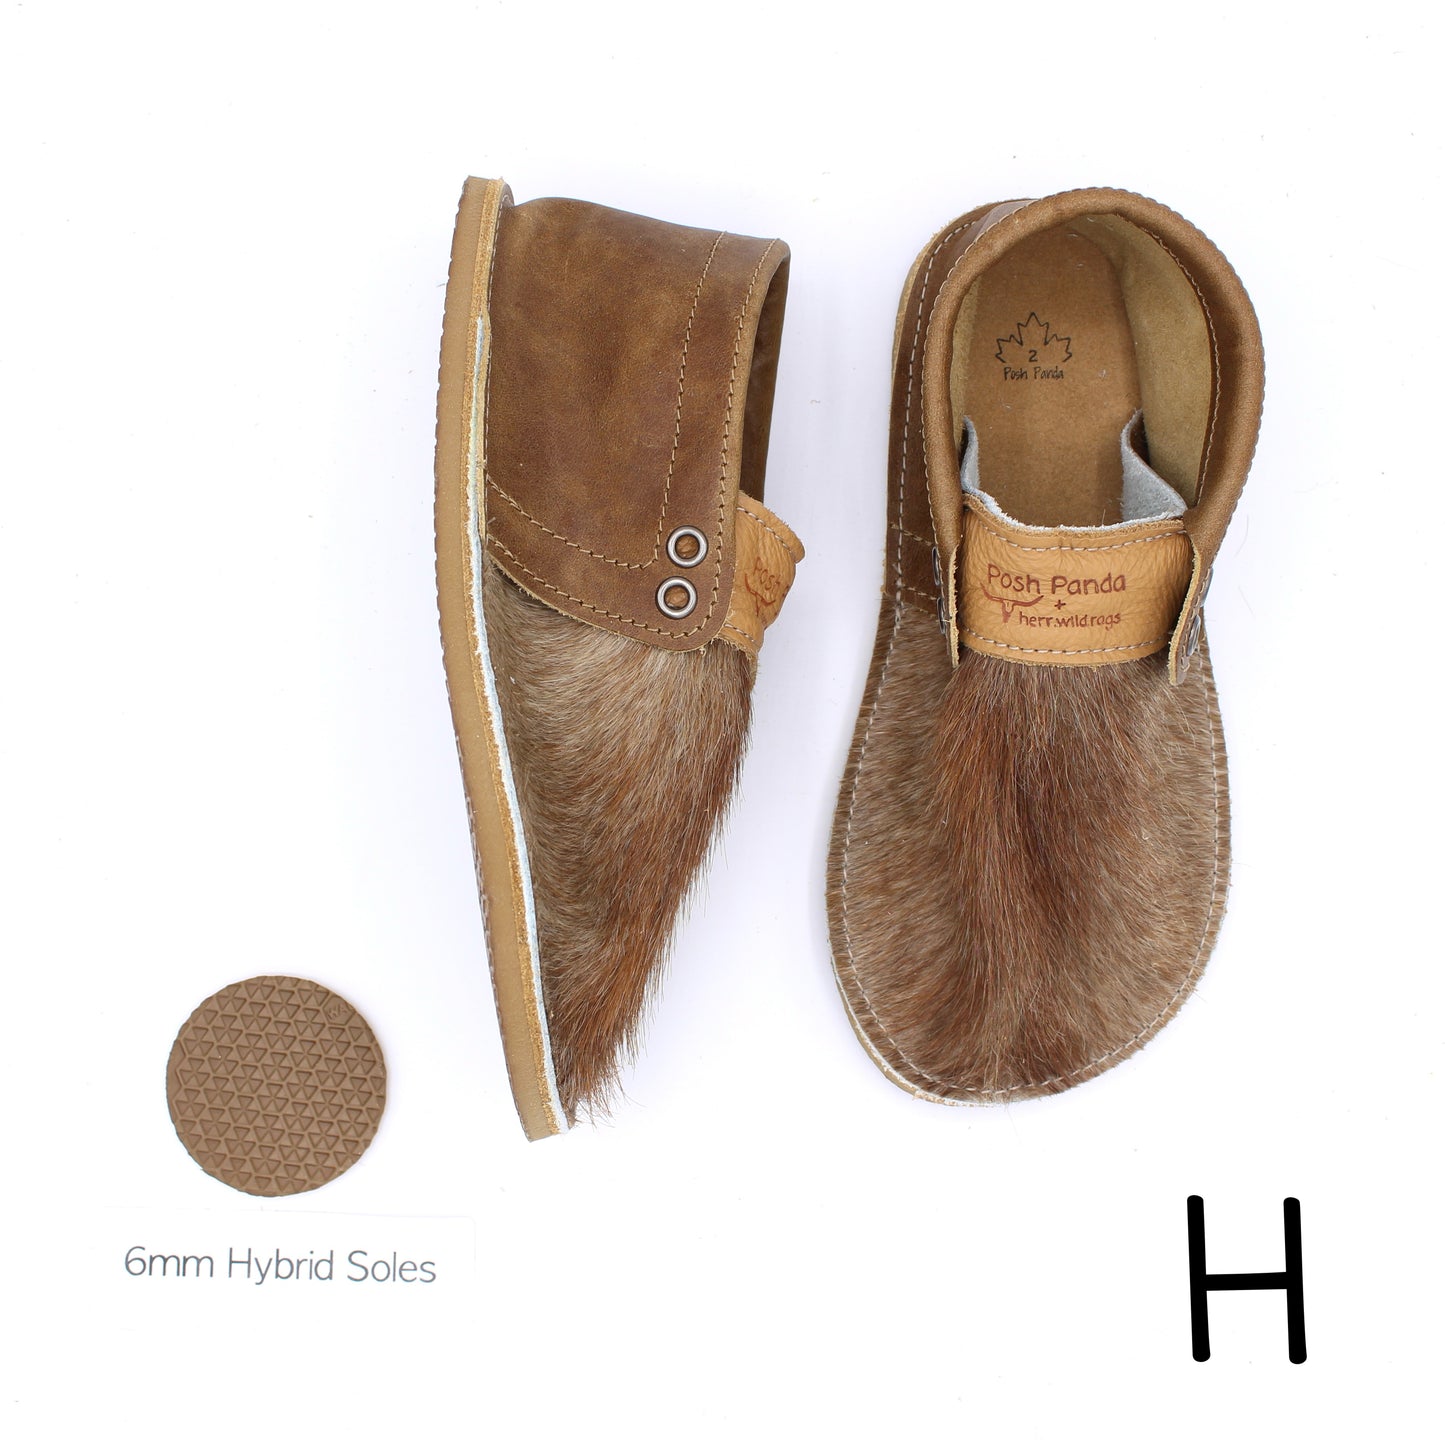 Hair Hide Mocs - YOUTH - Size 2 (4mm Sole)